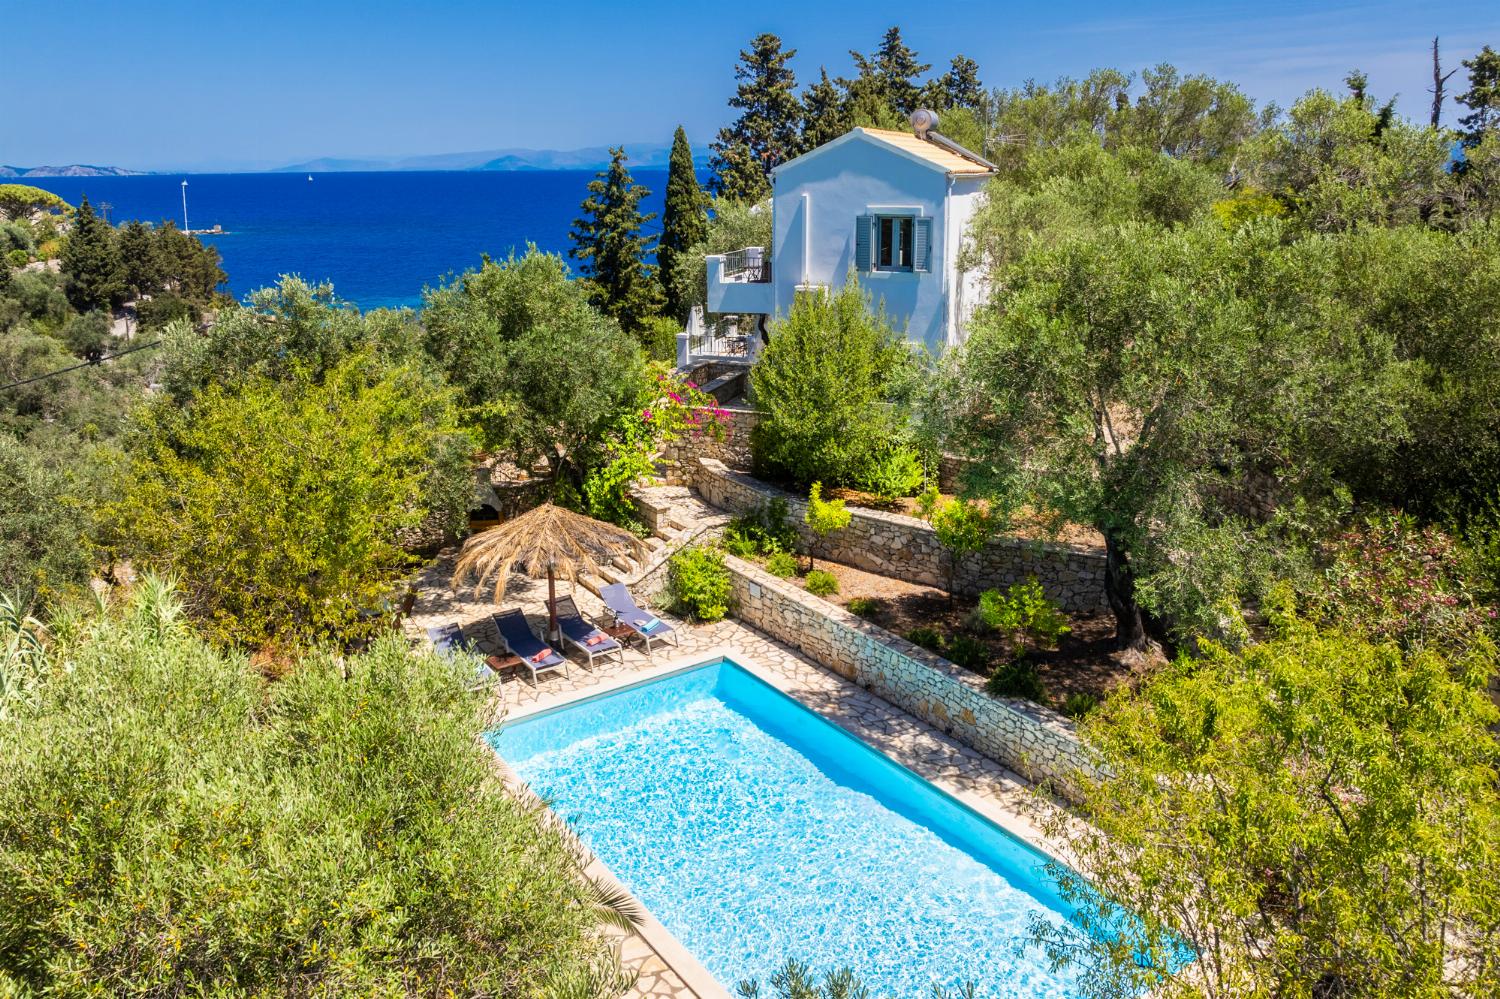 ,Beautiful villa with private pool and terrace with sea views